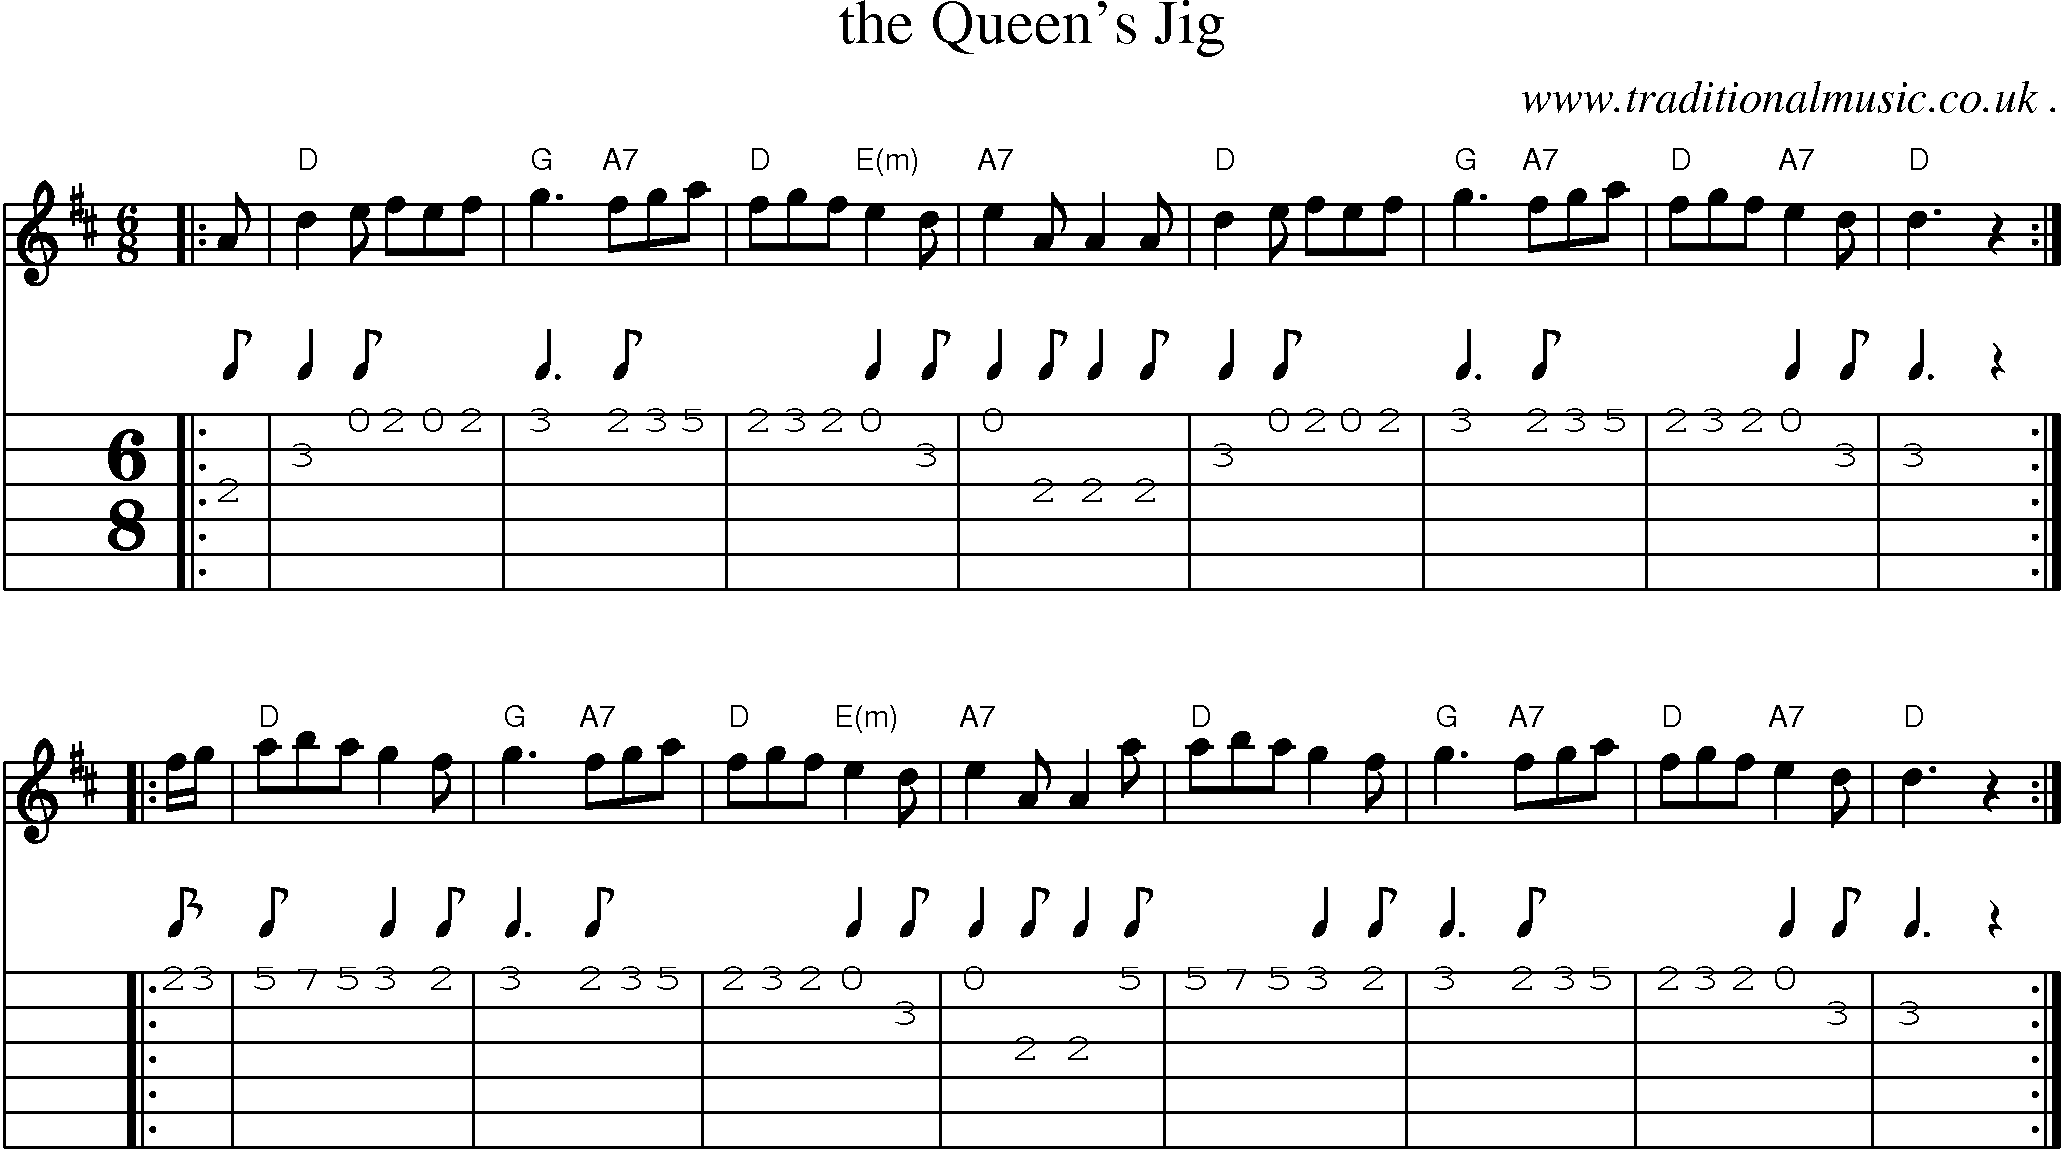 Sheet-music  score, Chords and Guitar Tabs for The Queens Jig